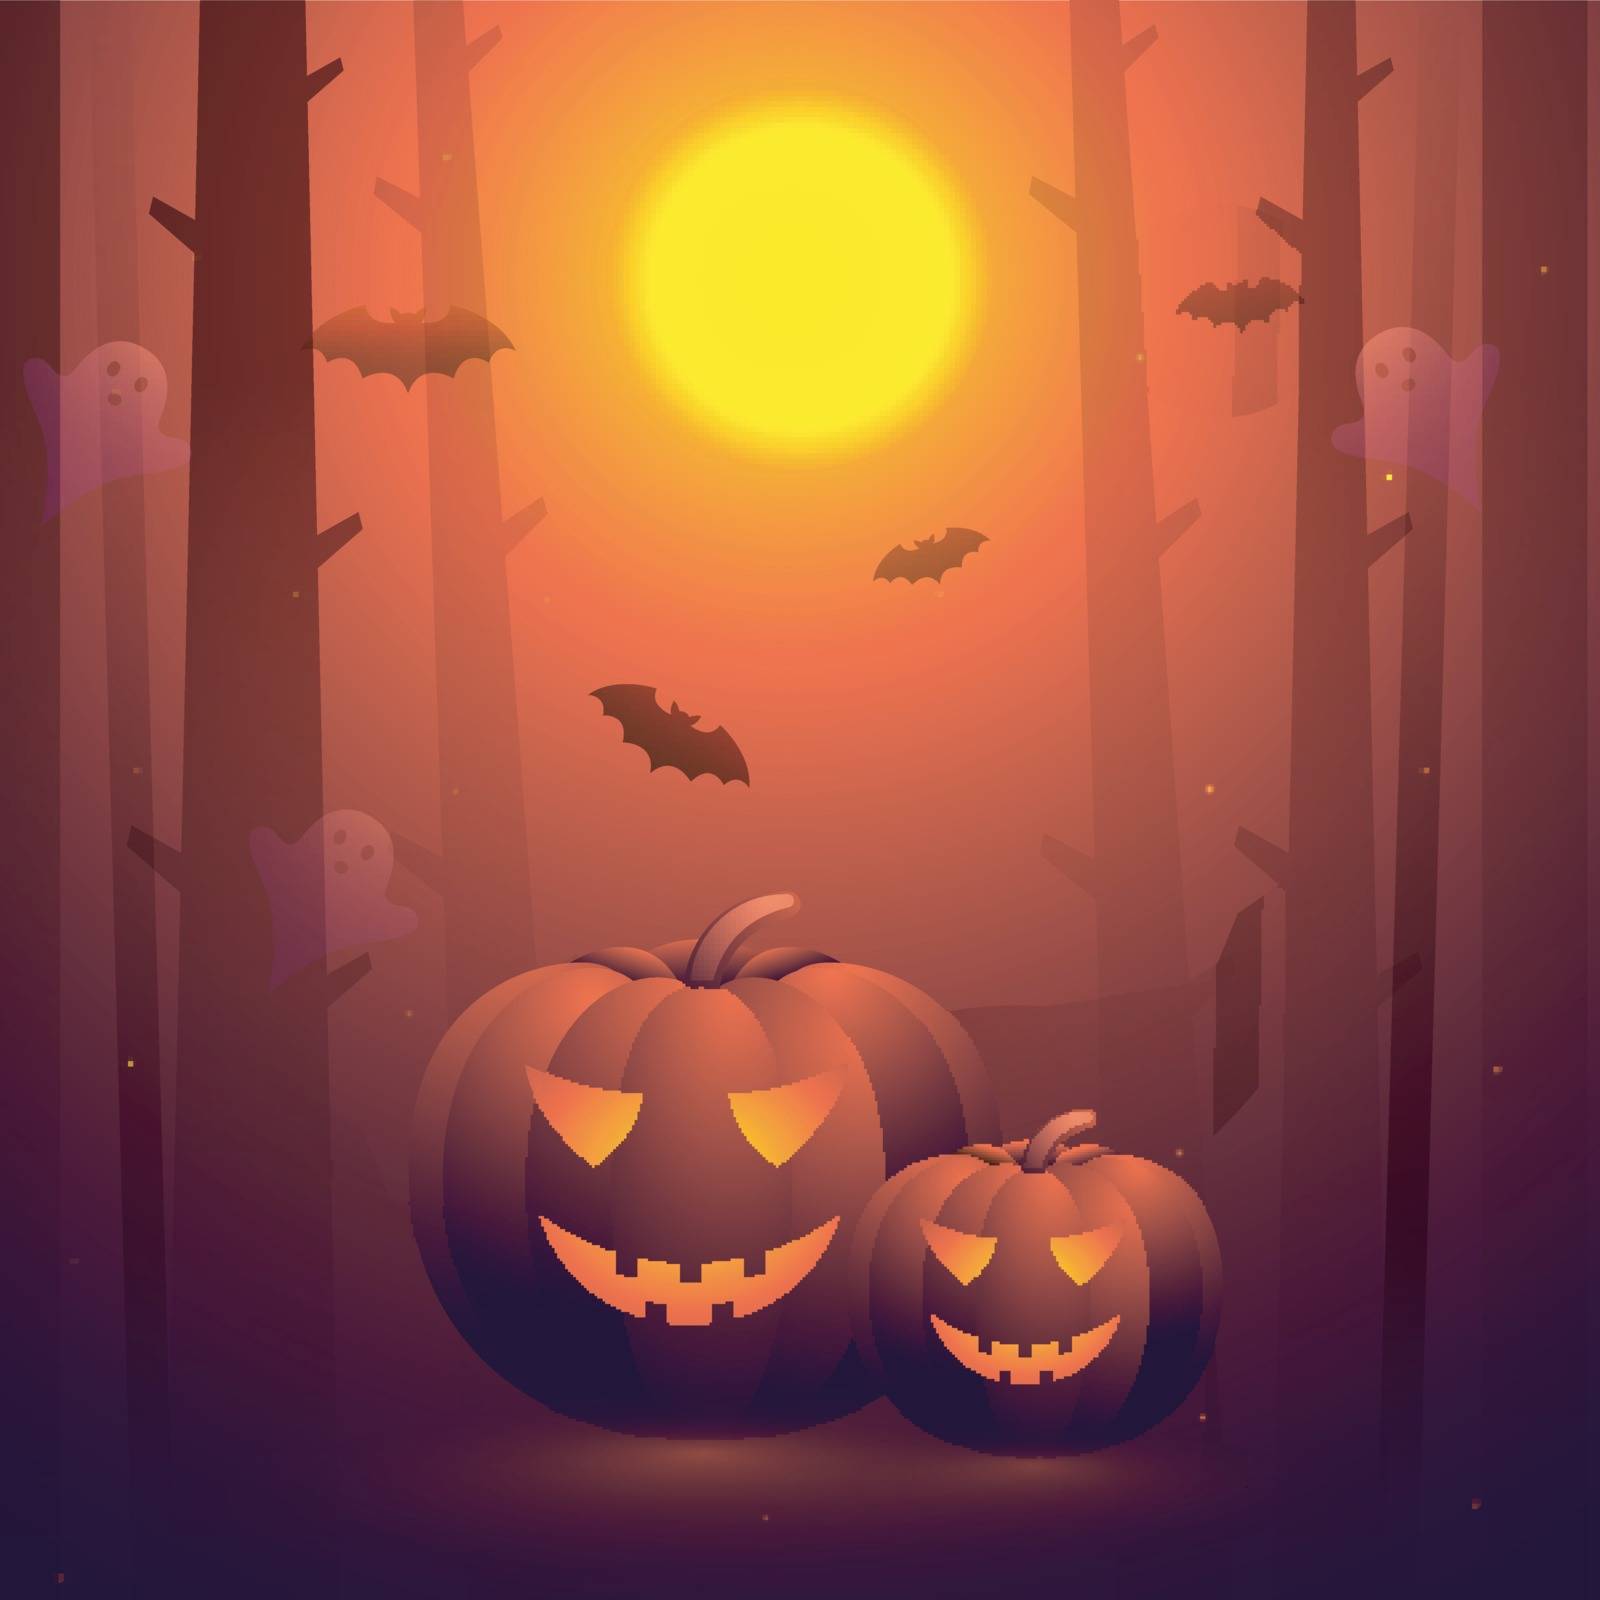 Spooky pumpkins in haunted forest on shiny full moon background for Happy Halloween celebration.